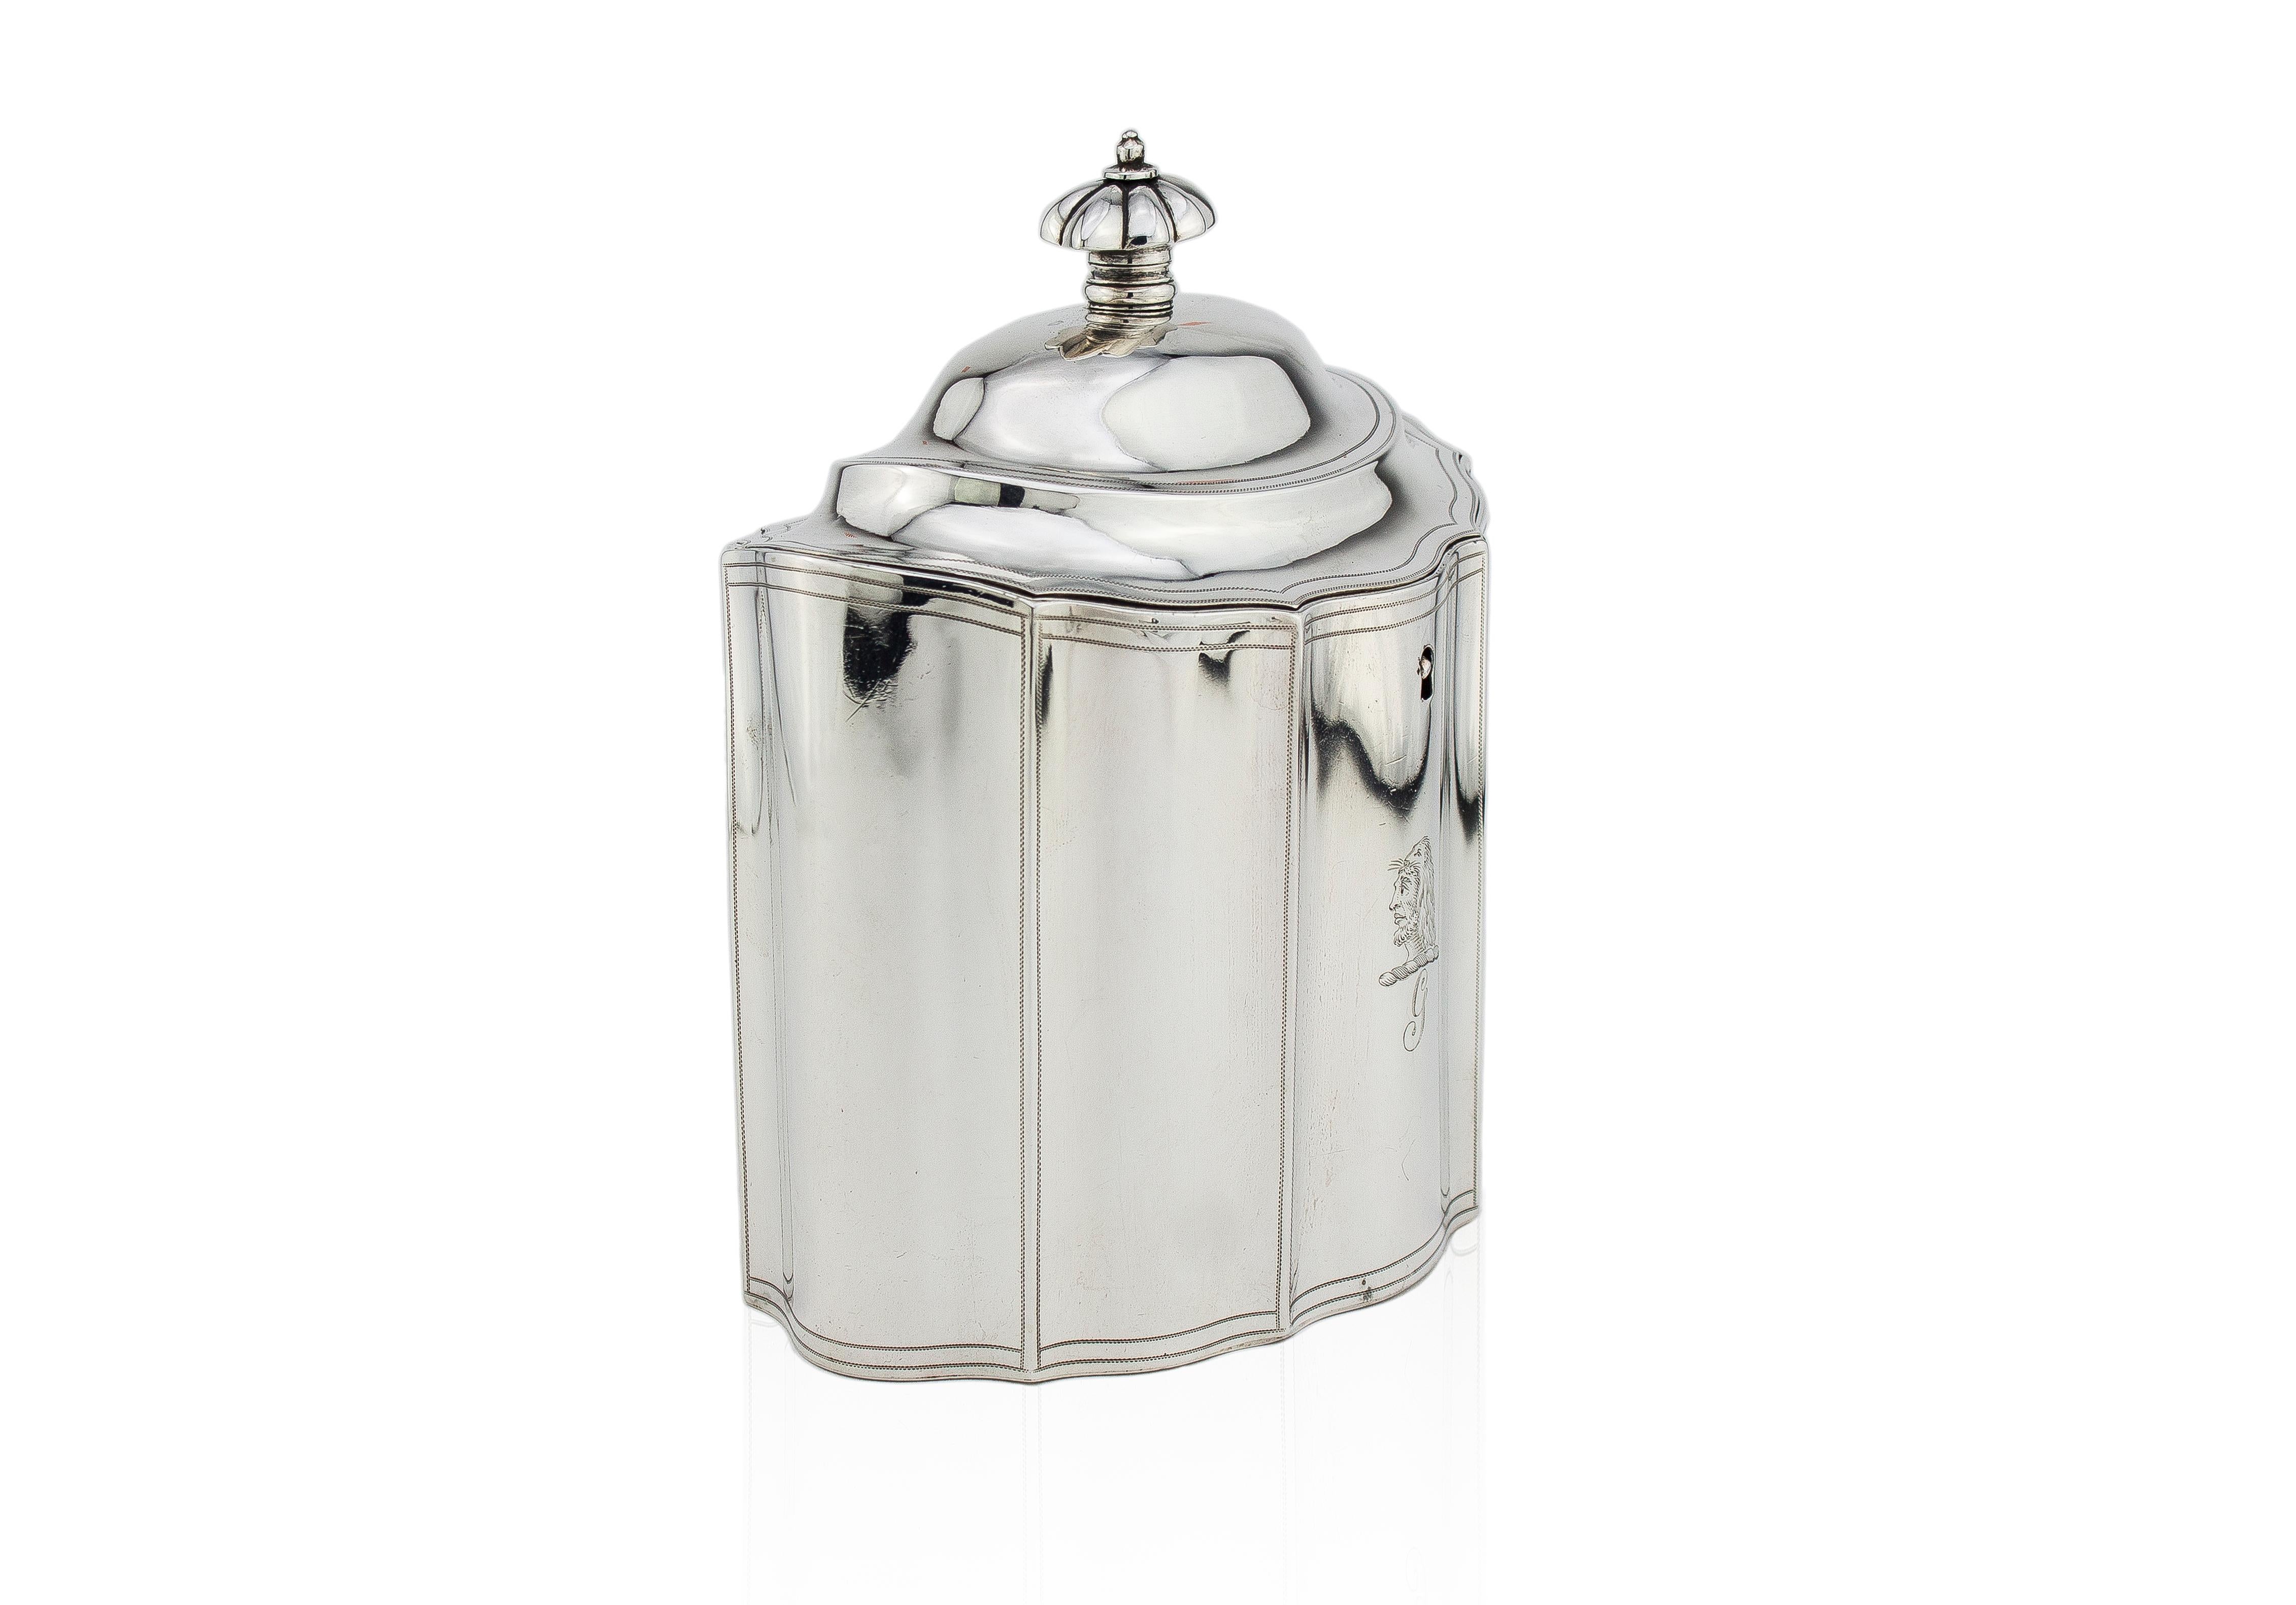 Antique Georgian sterling silver tea caddy with coat of arms, fantastic quality and pristine condition for it's age.
Made in London 1796
Maker: Peter & Ann Bateman 
Fully hallmarked.

Dimensions:
Size: 14.6 x 10.9 x 17 cm
Weight: 432